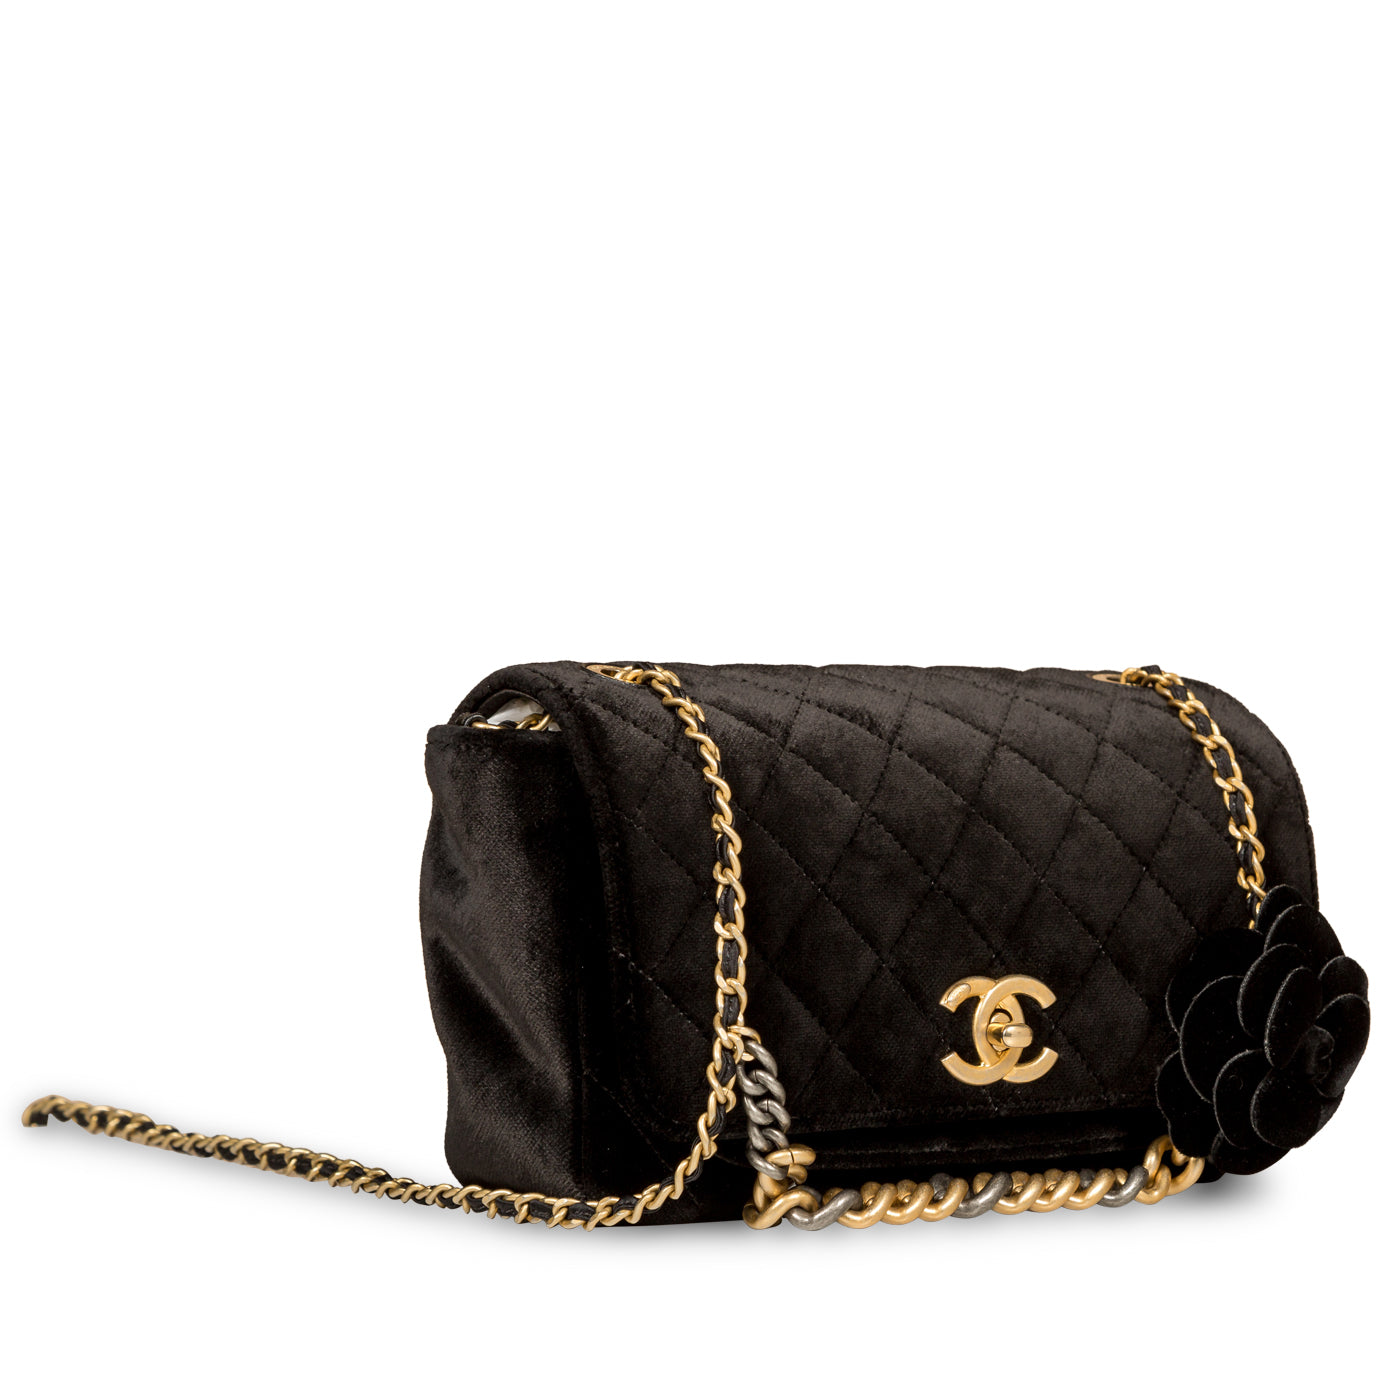 Chanel Black Velvet Camellia No 5 Clutch Bag with Silver Hardware  Lot  19046  Heritage Auctions